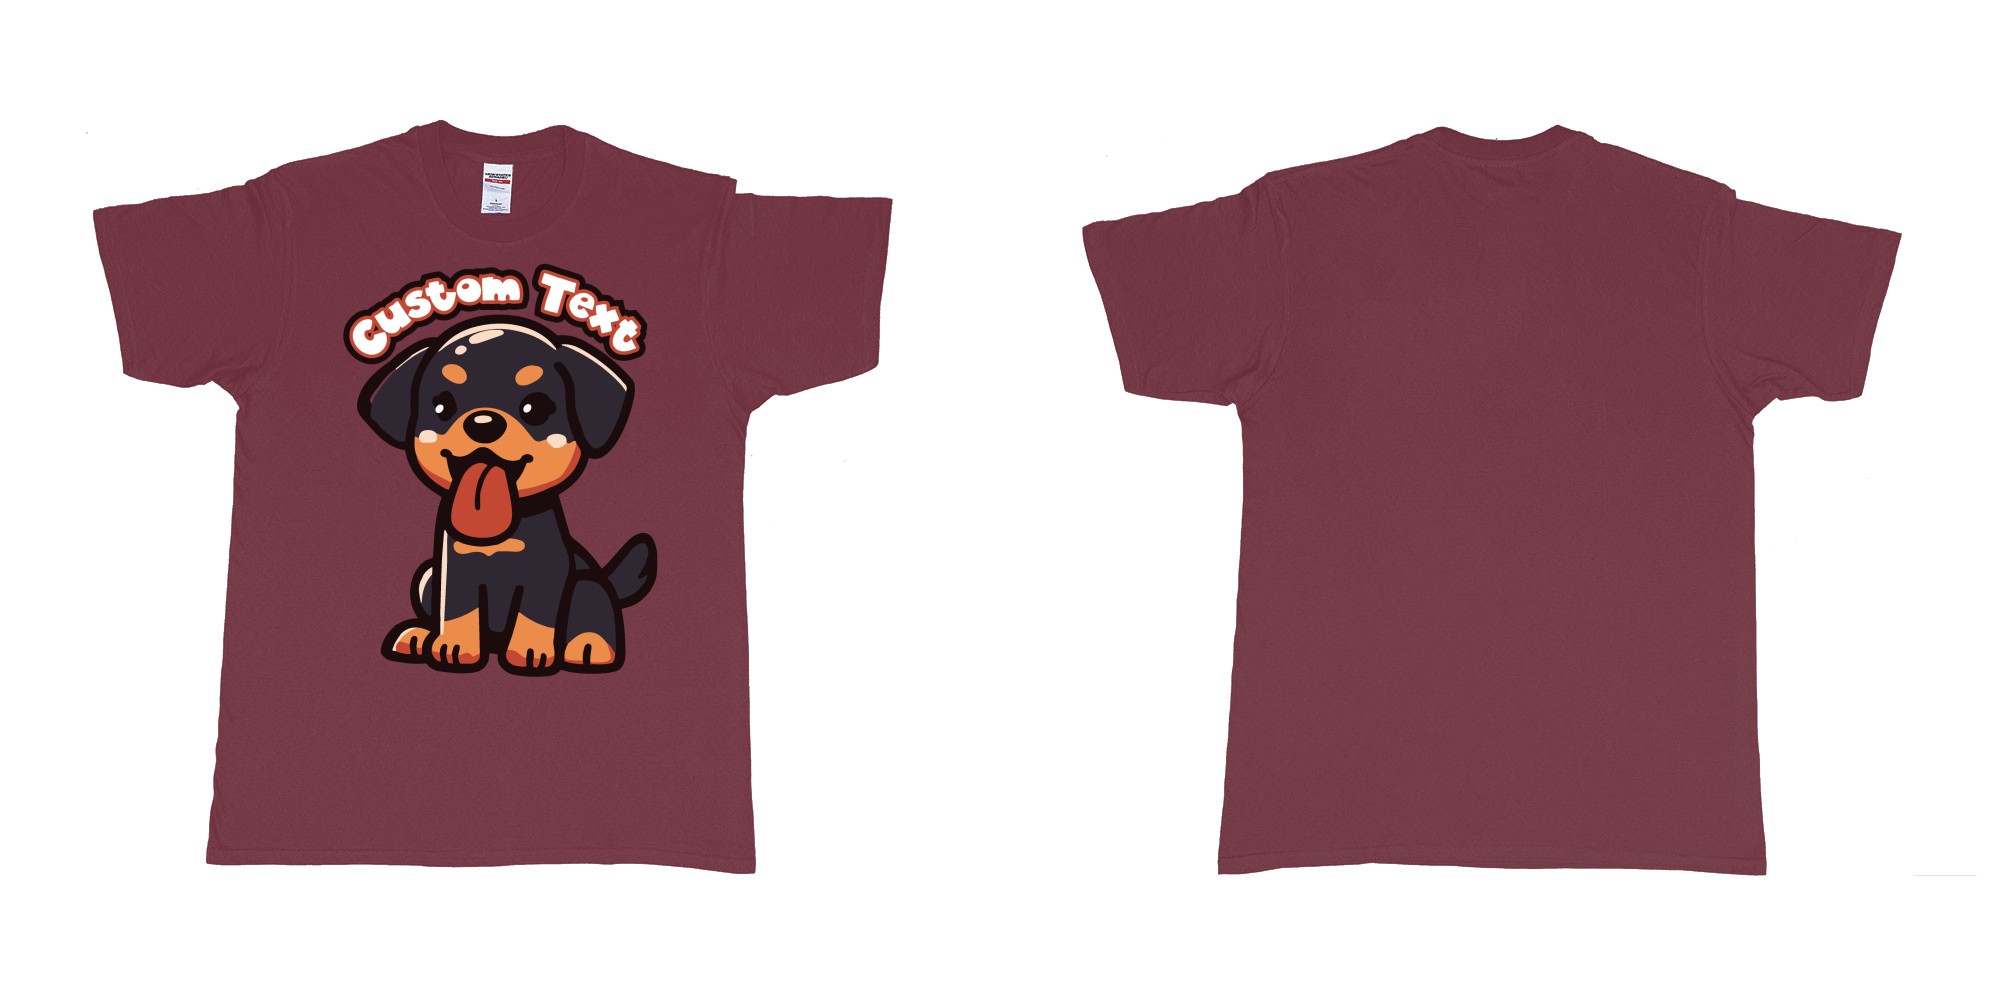 Custom tshirt design yuki rottweiler custom text in fabric color marron choice your own text made in Bali by The Pirate Way